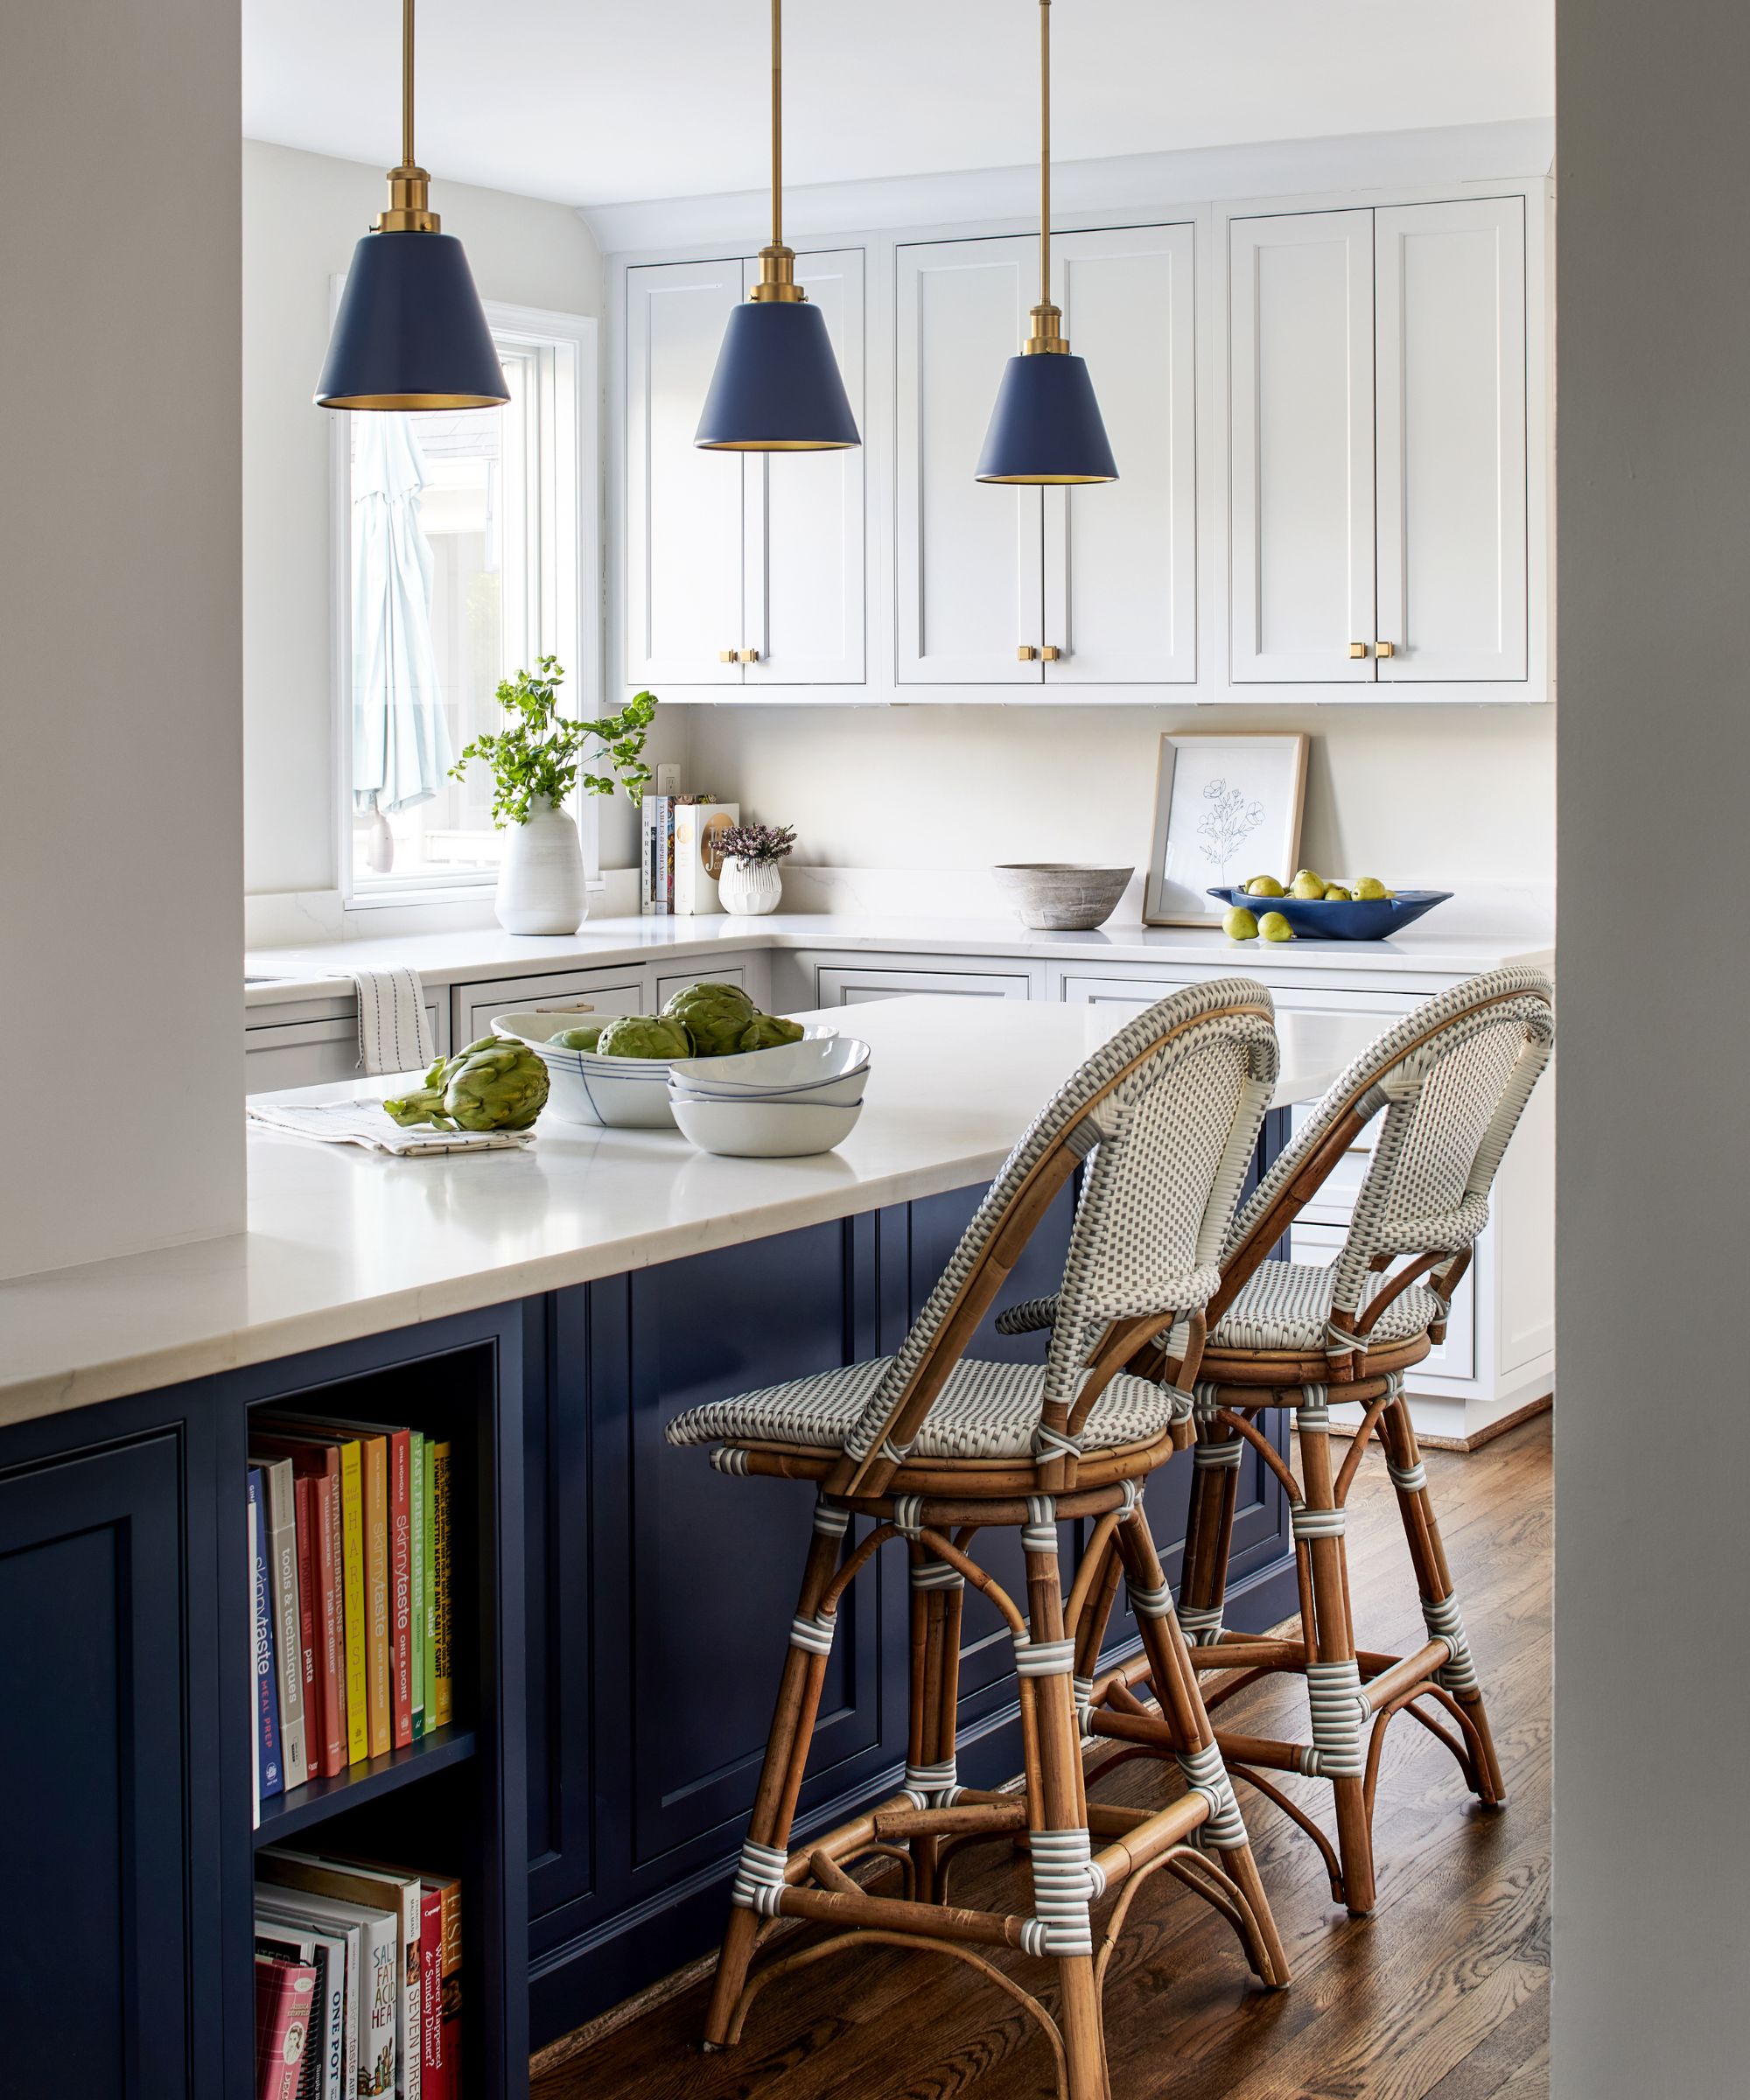 Kitchen with breakfast bar and bar stools by InSite Builders & Remodeling, photograph Stacy Zarin Goldberg